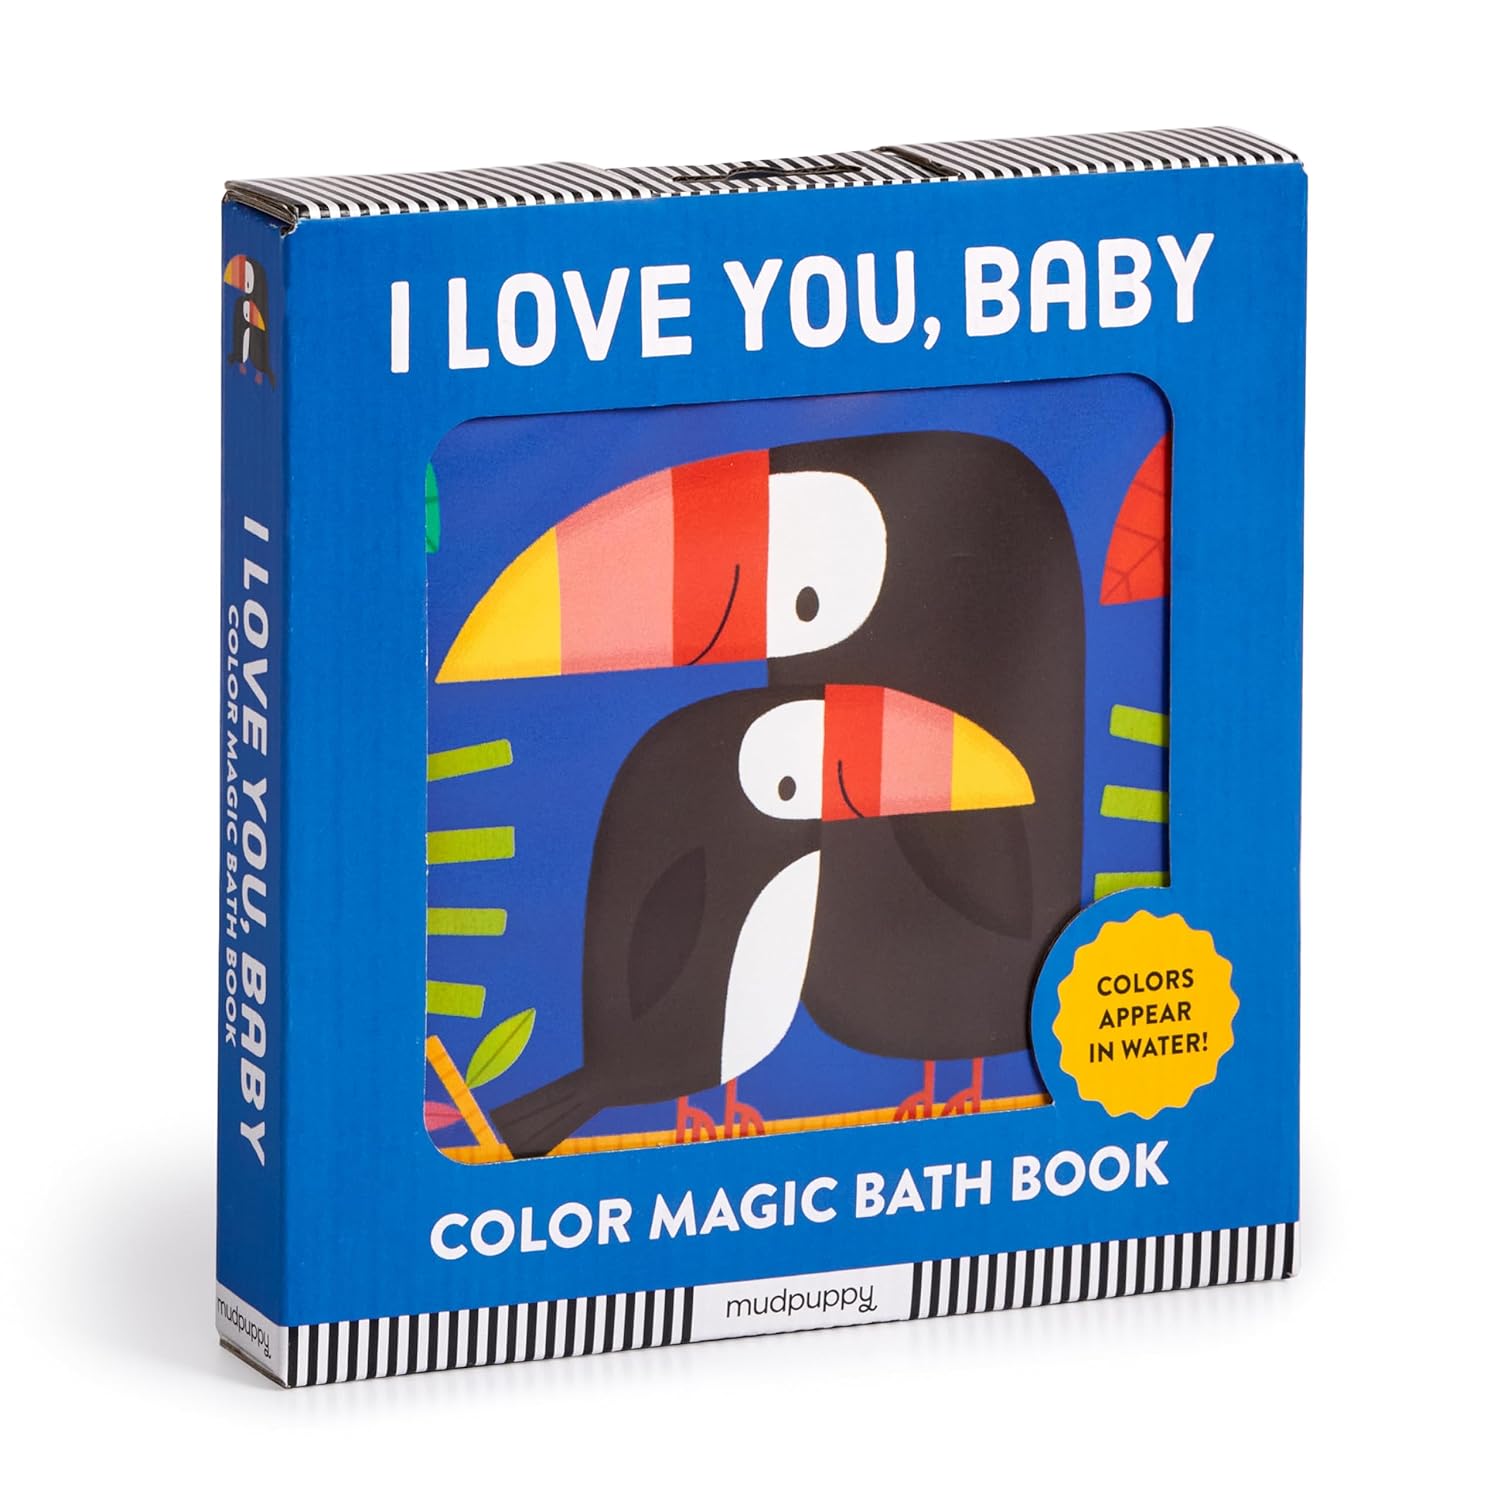 I Love You, Baby Color Magic Bath Book from Mudpuppy is sure to keep babies and toddlers entertained during bath time. Featuring illustrations of brightly colored animals and their youngsters, it is truly a one-of-a-kind experience that will be enjoyed time and time again. 